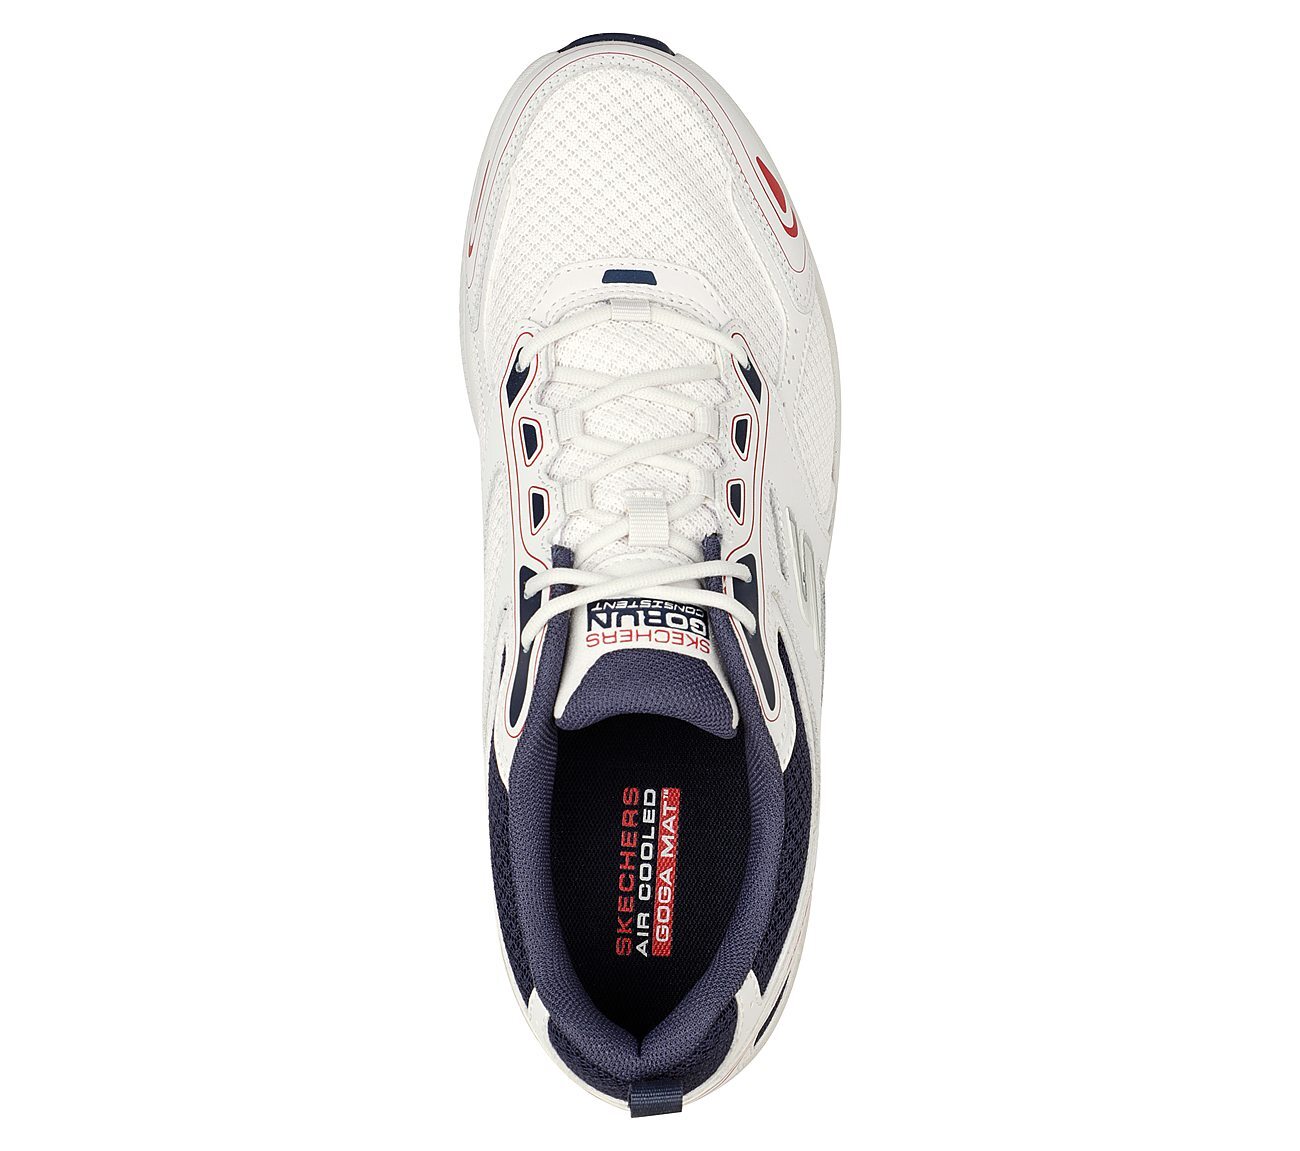 GO RUN CONSISTENT - VESTIGE, WHITE/NAVY/RED Footwear Top View